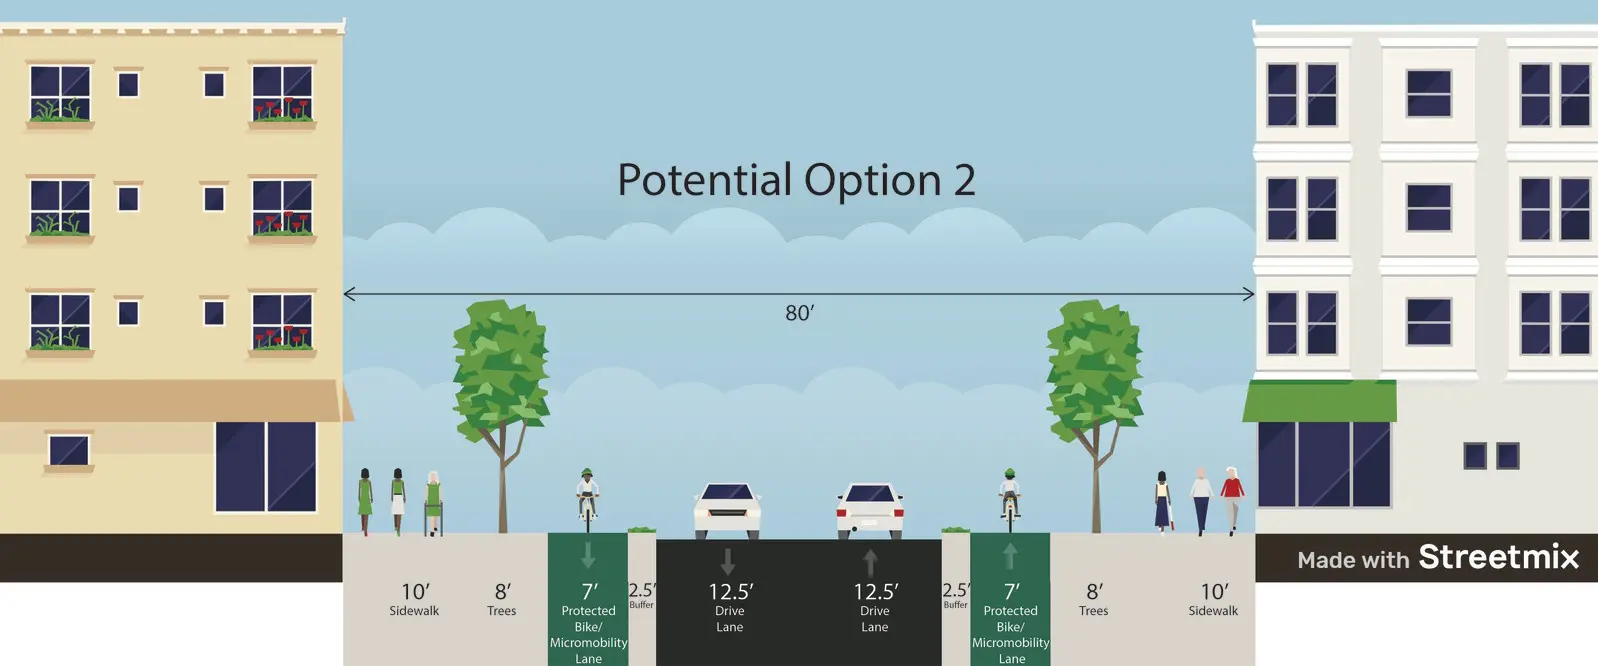 Cross-section of a street with bike lanes and street trees